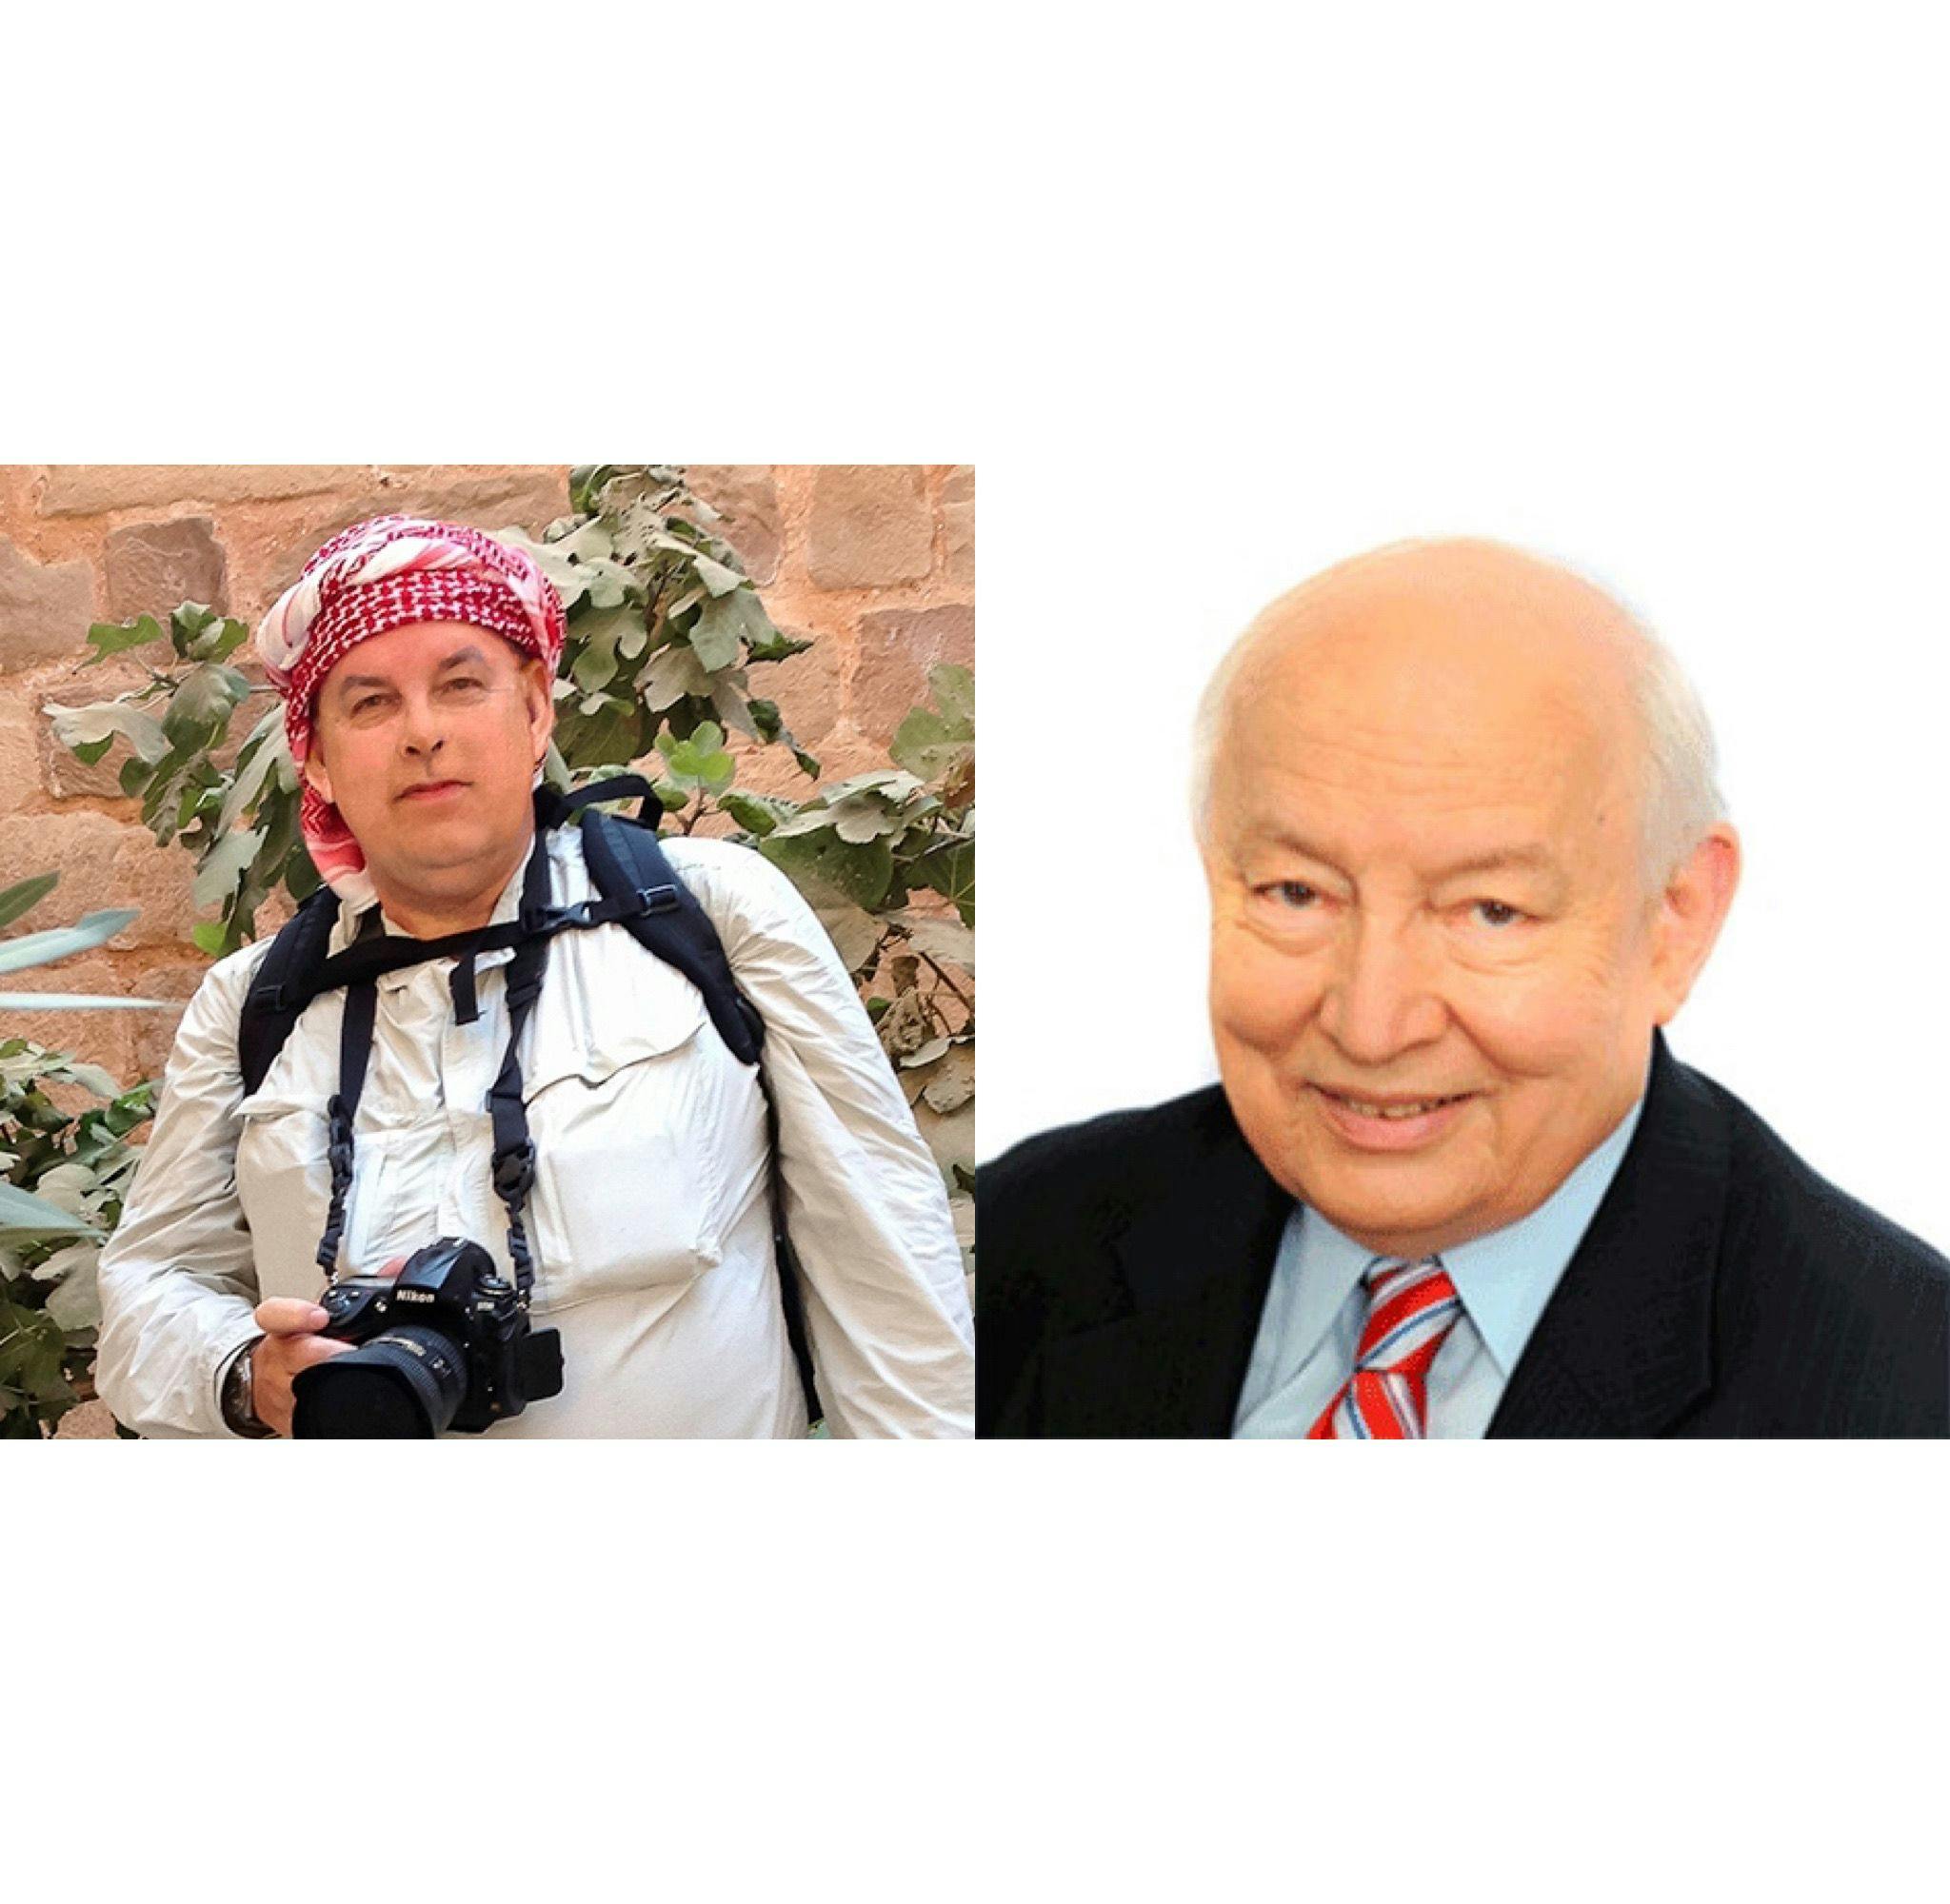 Herbal medicine and natural health communities mourn passing of leading figures Steven Foster and Jim Turner